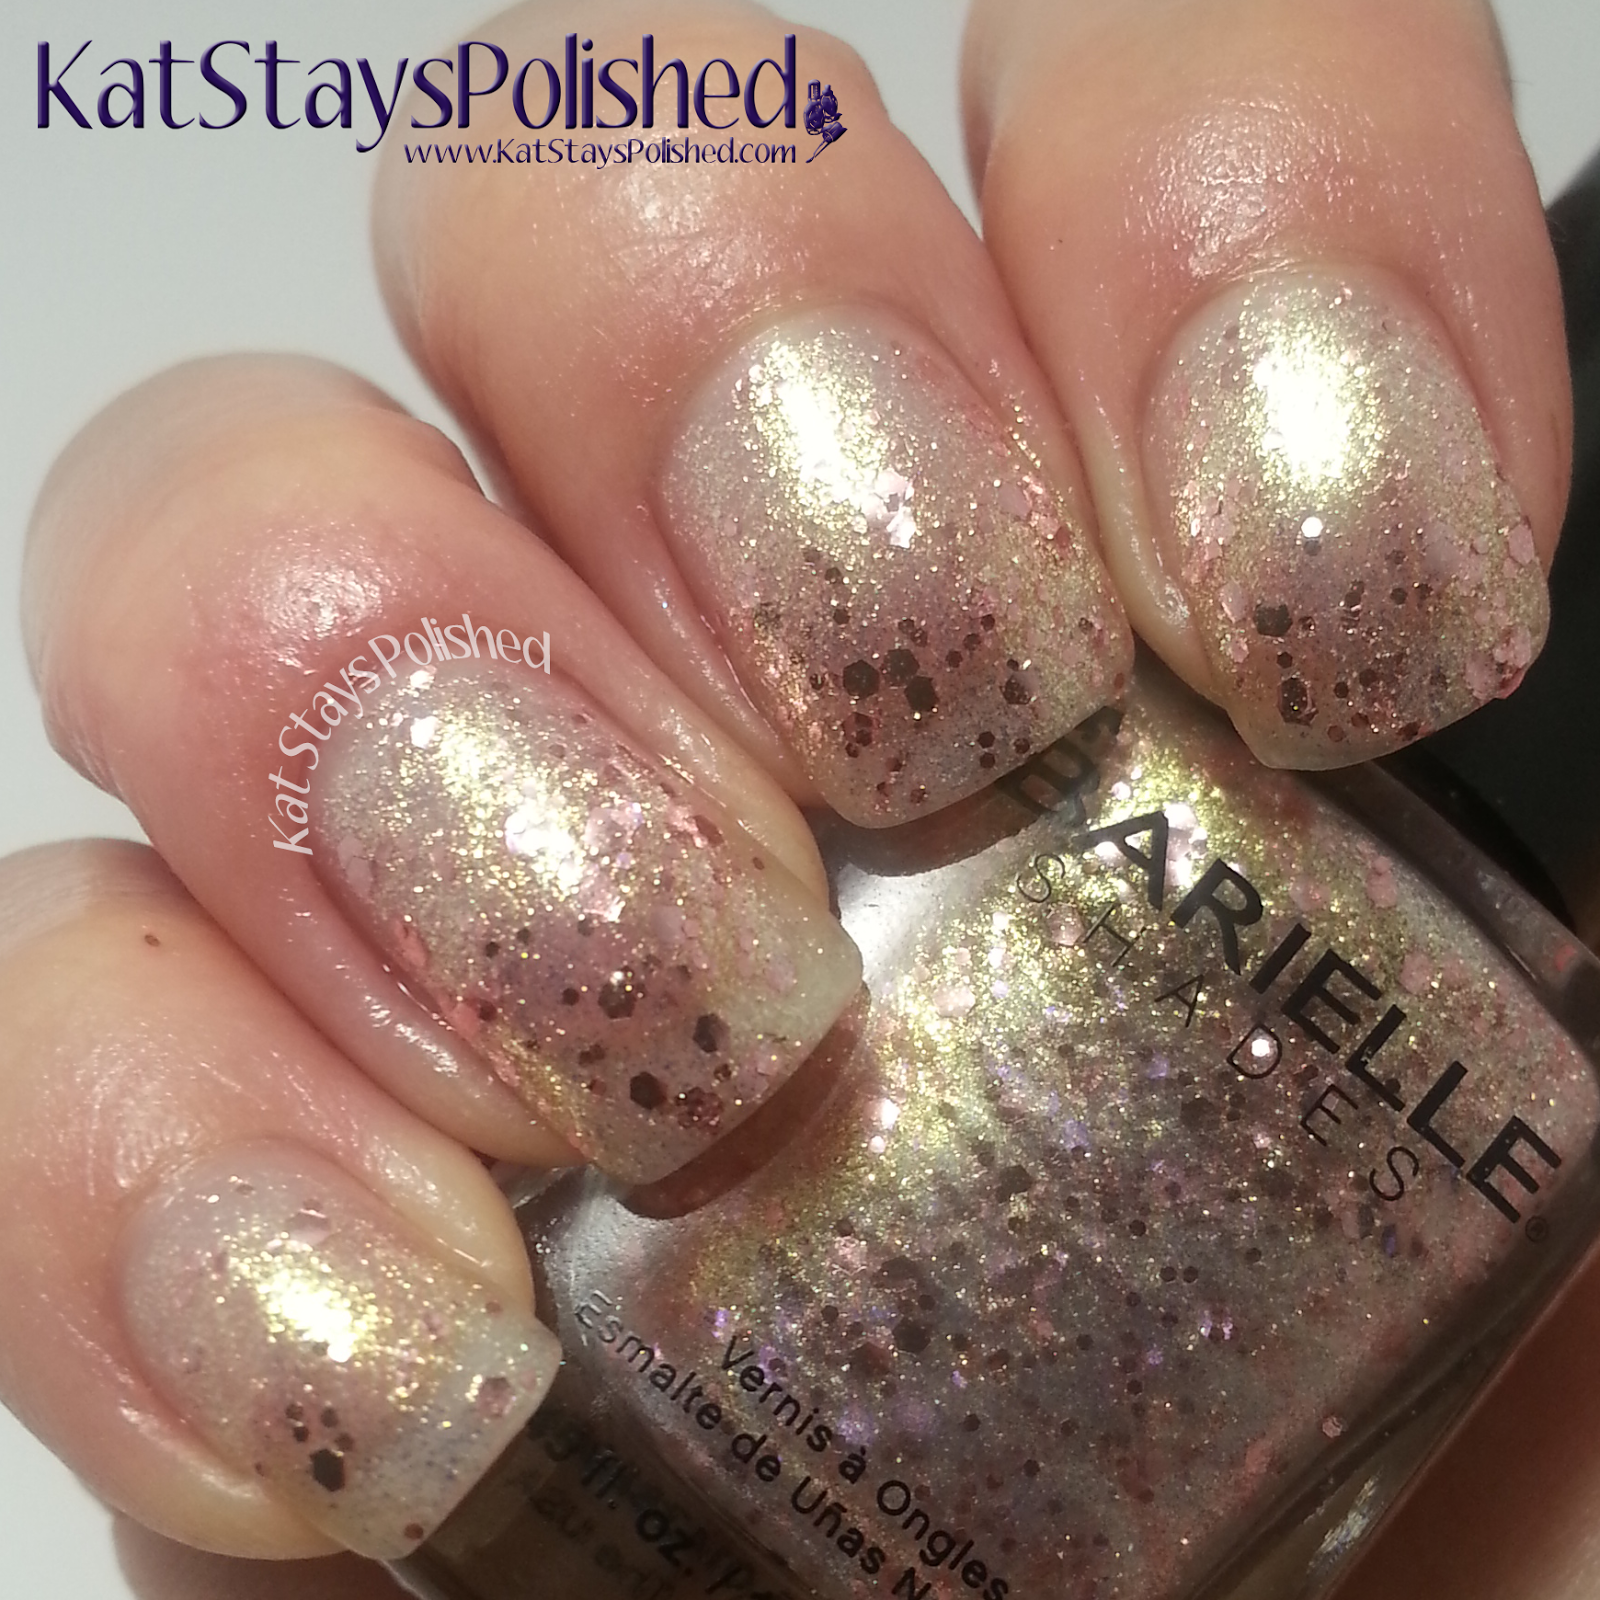 Barielle Bling It On - Golden Halo | Kat Stays Polished